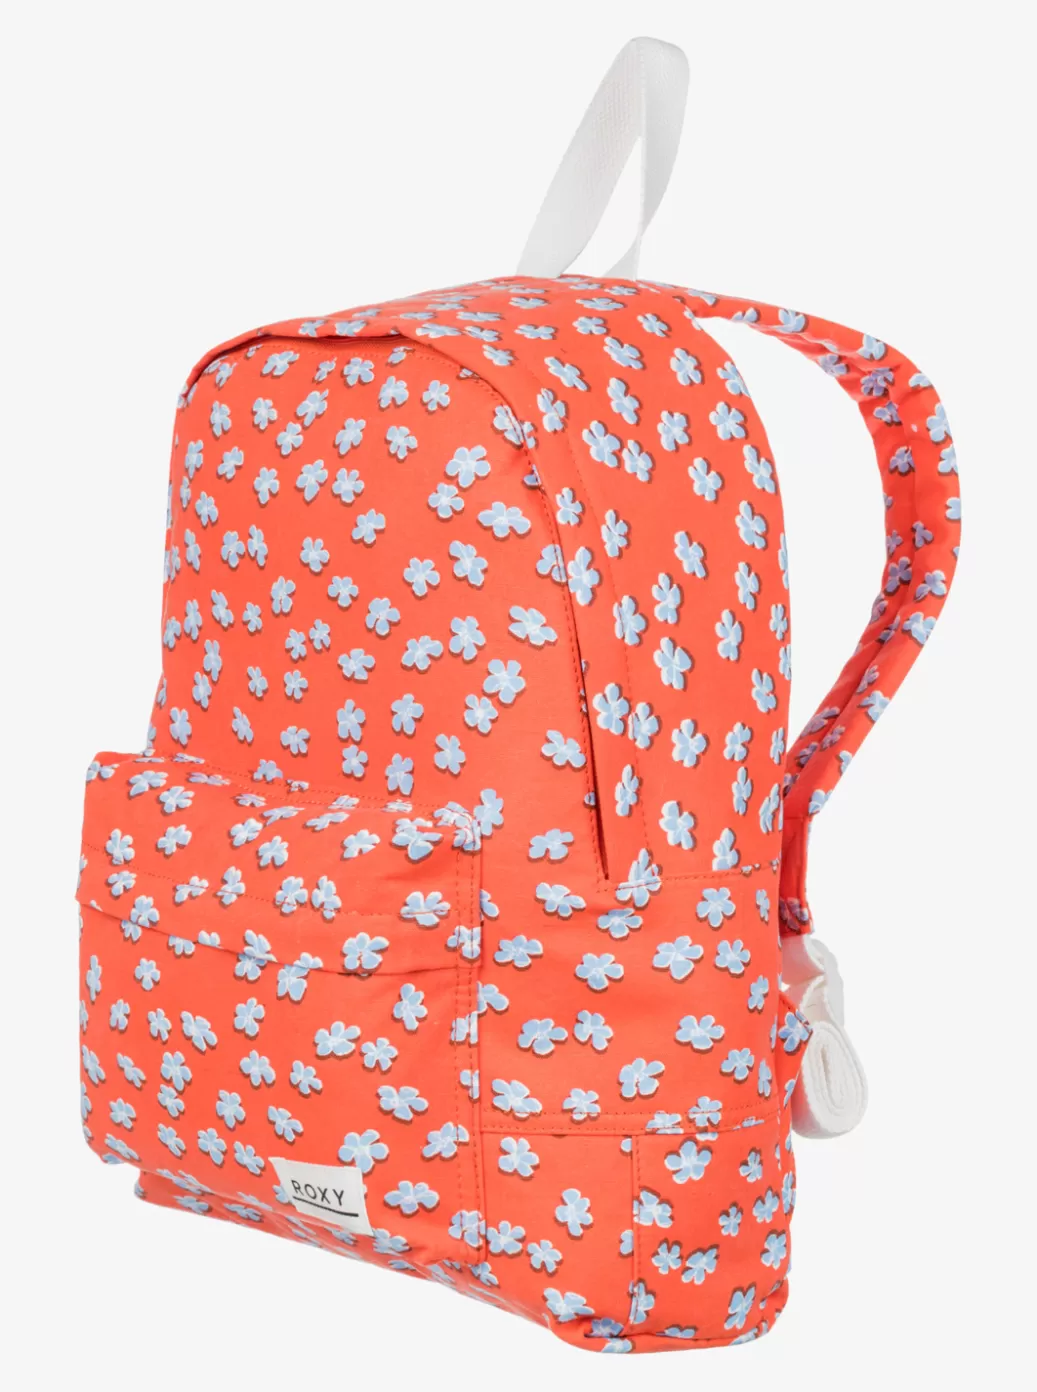 Backpacks | WOMEN ROXY Sugar Baby Canvas 16L Small Backpack Tiger Lily Flower Rain